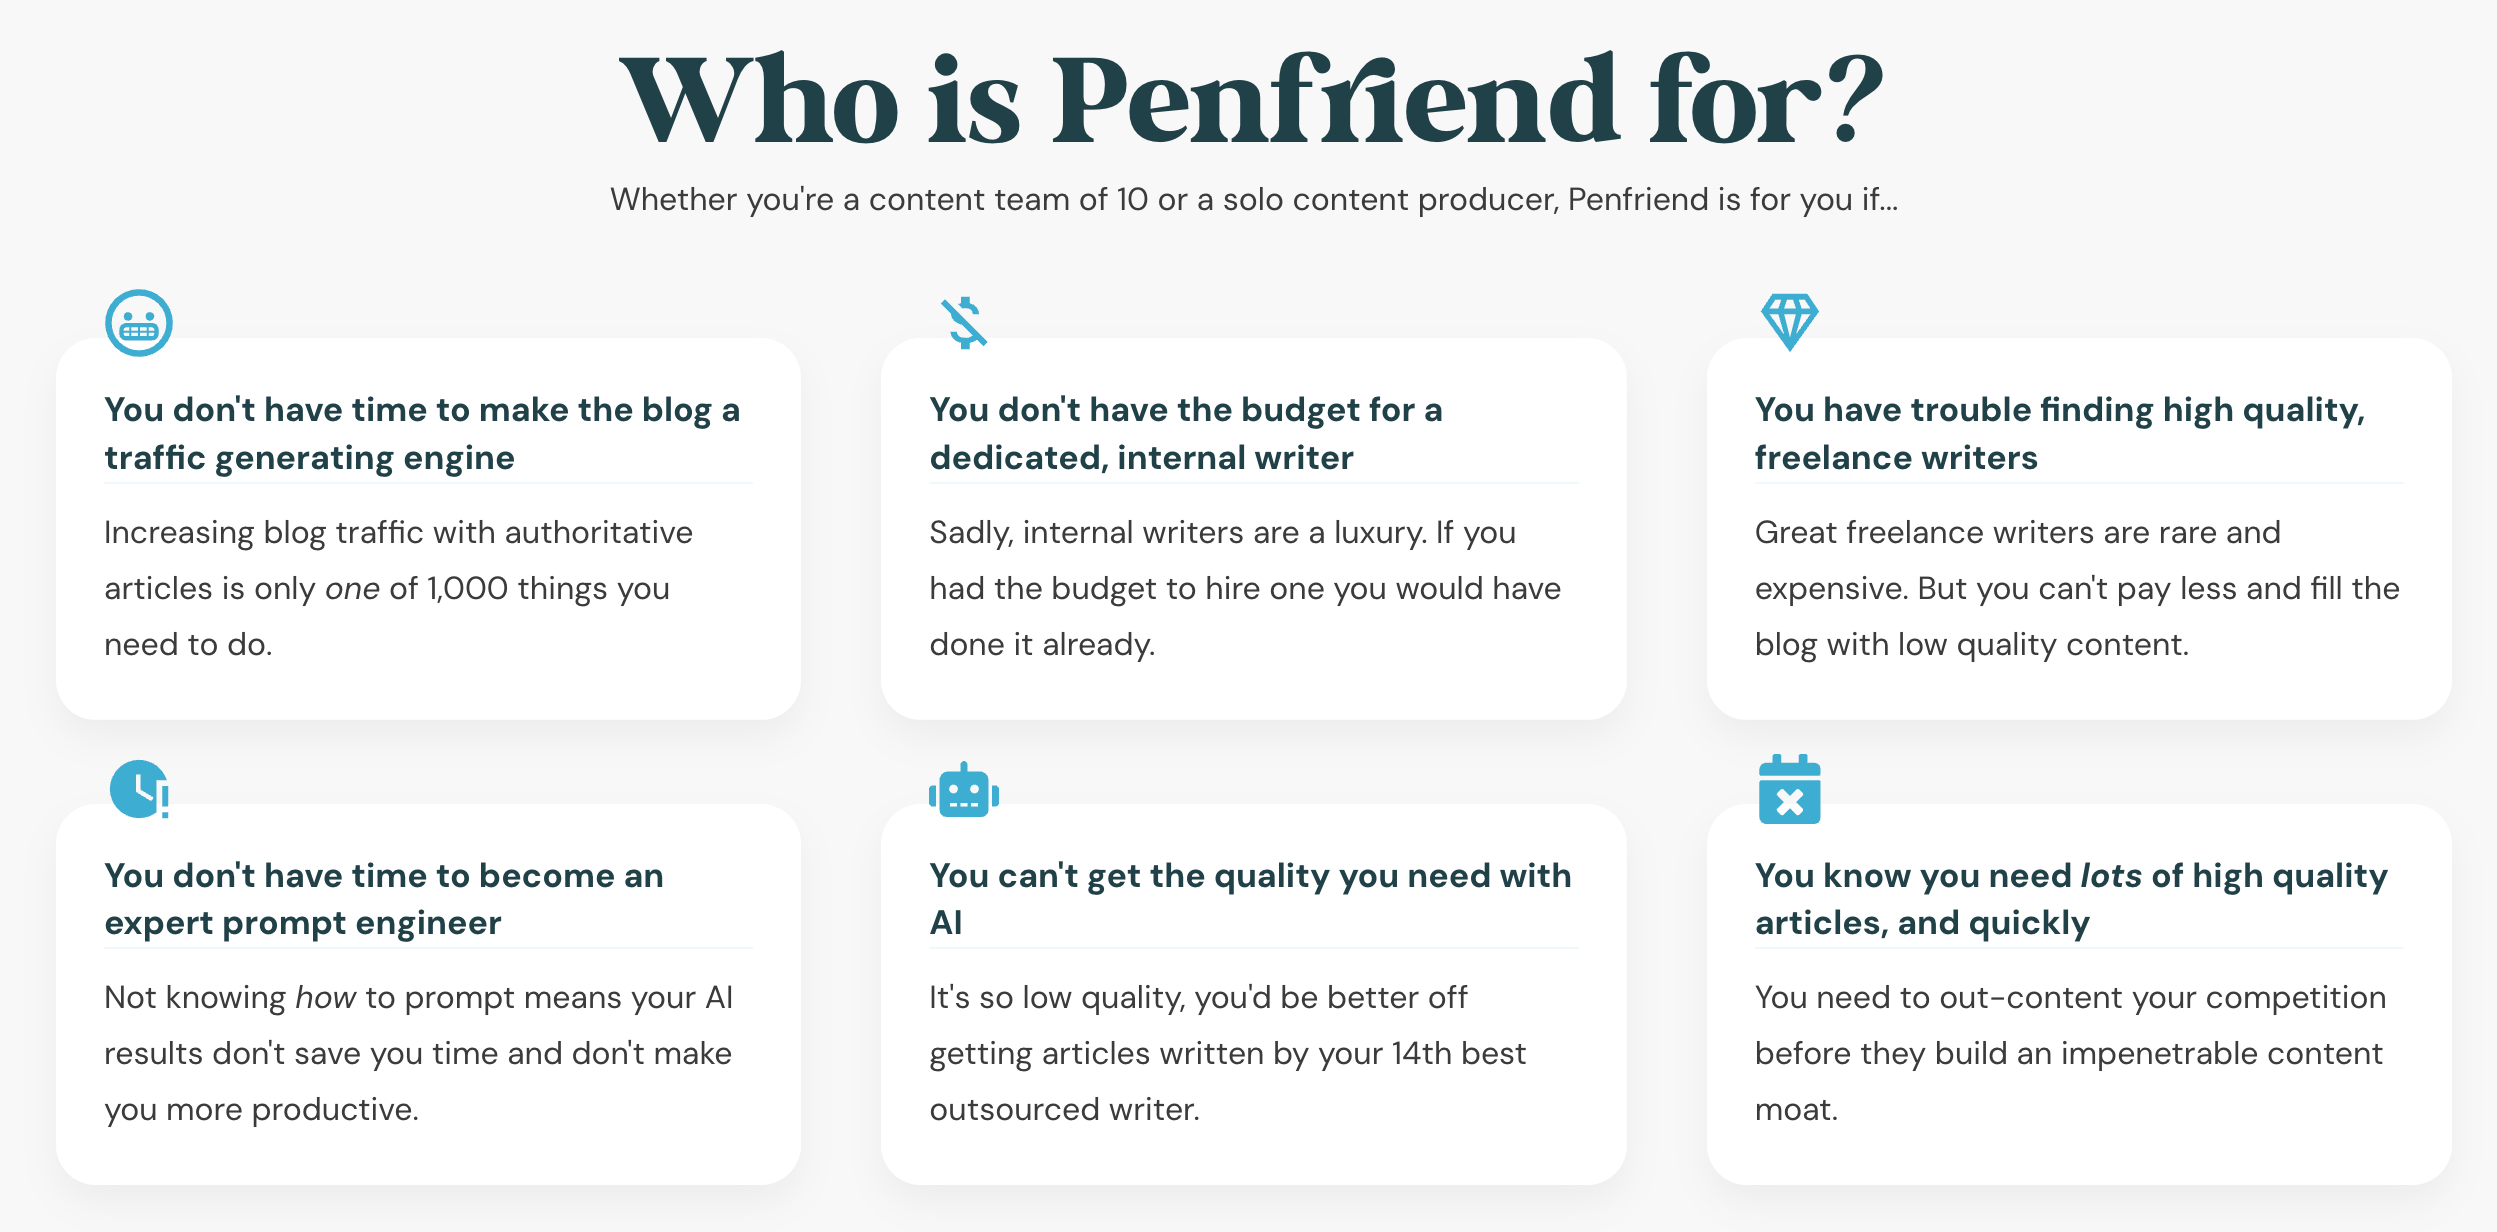 Who is Penfriend for